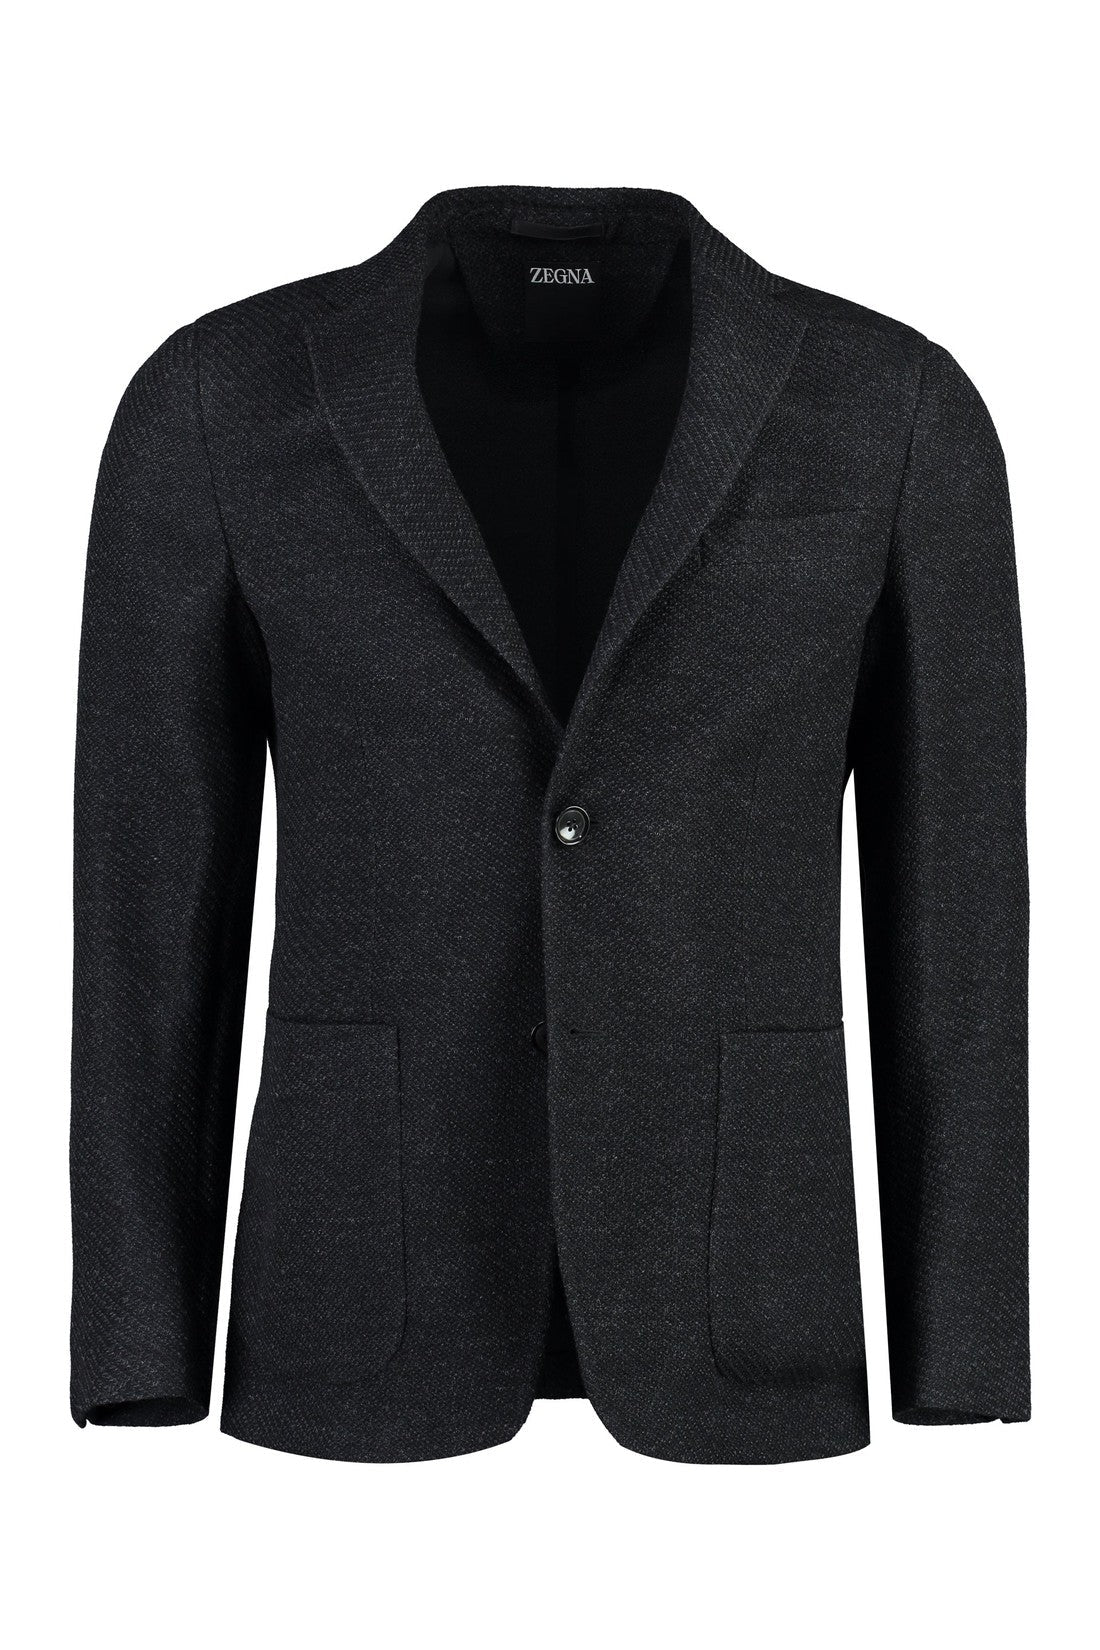 Zegna-OUTLET-SALE-Boucle wool single-breasted jacket-ARCHIVIST